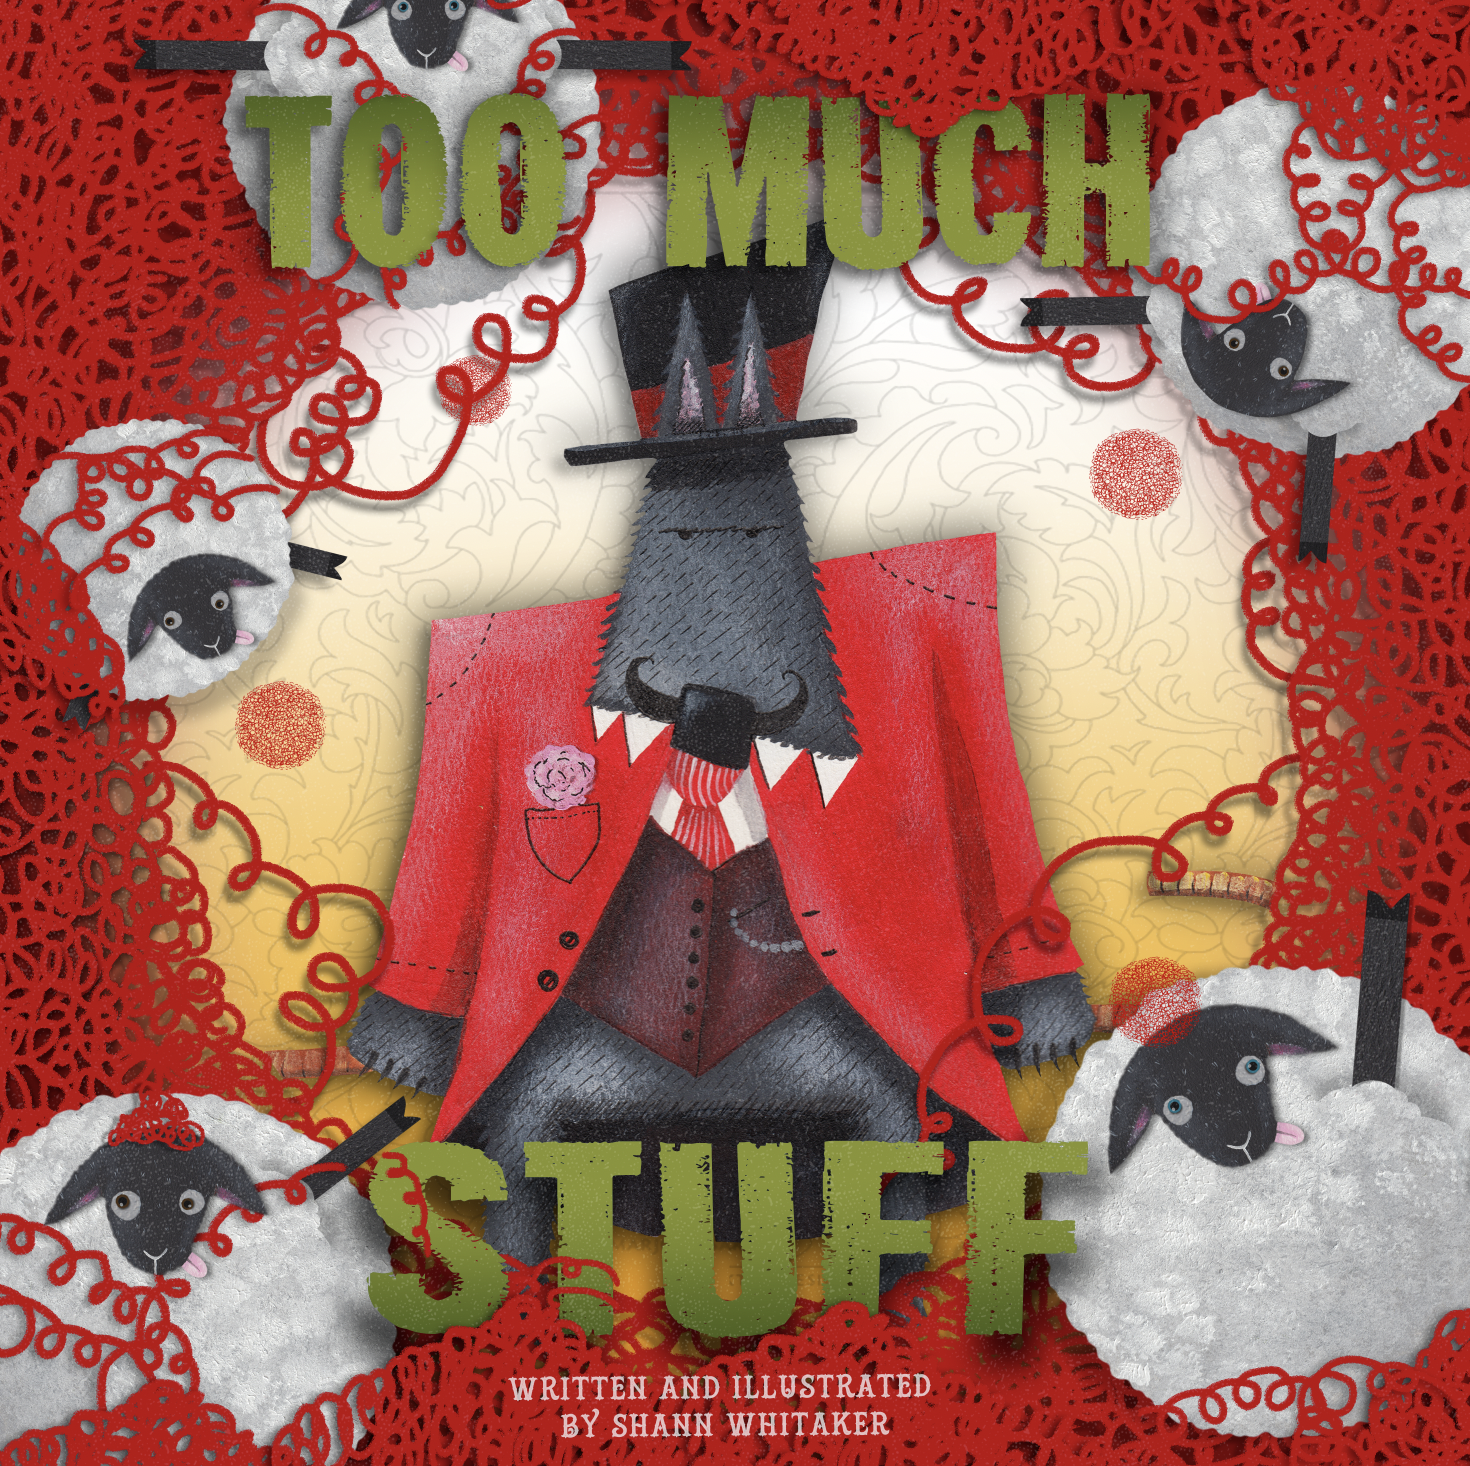 FREE: Too Much Stuff by Shann Whitaker